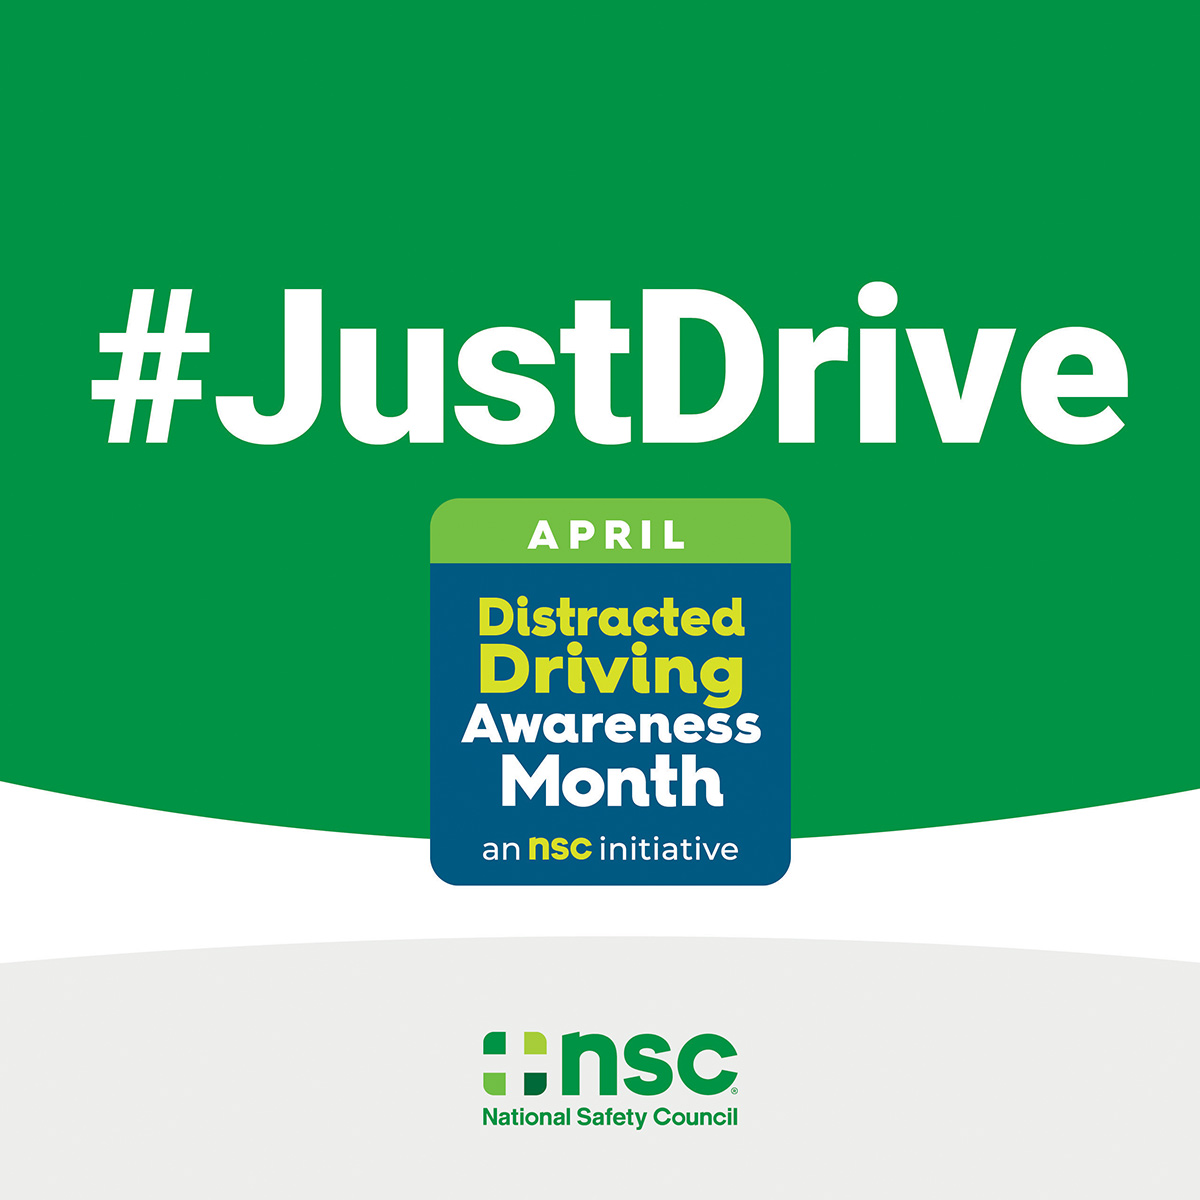 Do you know the simple steps you can take to avoid #distracteddriving ❓
Enabling Do Not Disturb mode and taking care of texts before you drive can help #KeepEachOtherSafe. 

#JustDrive